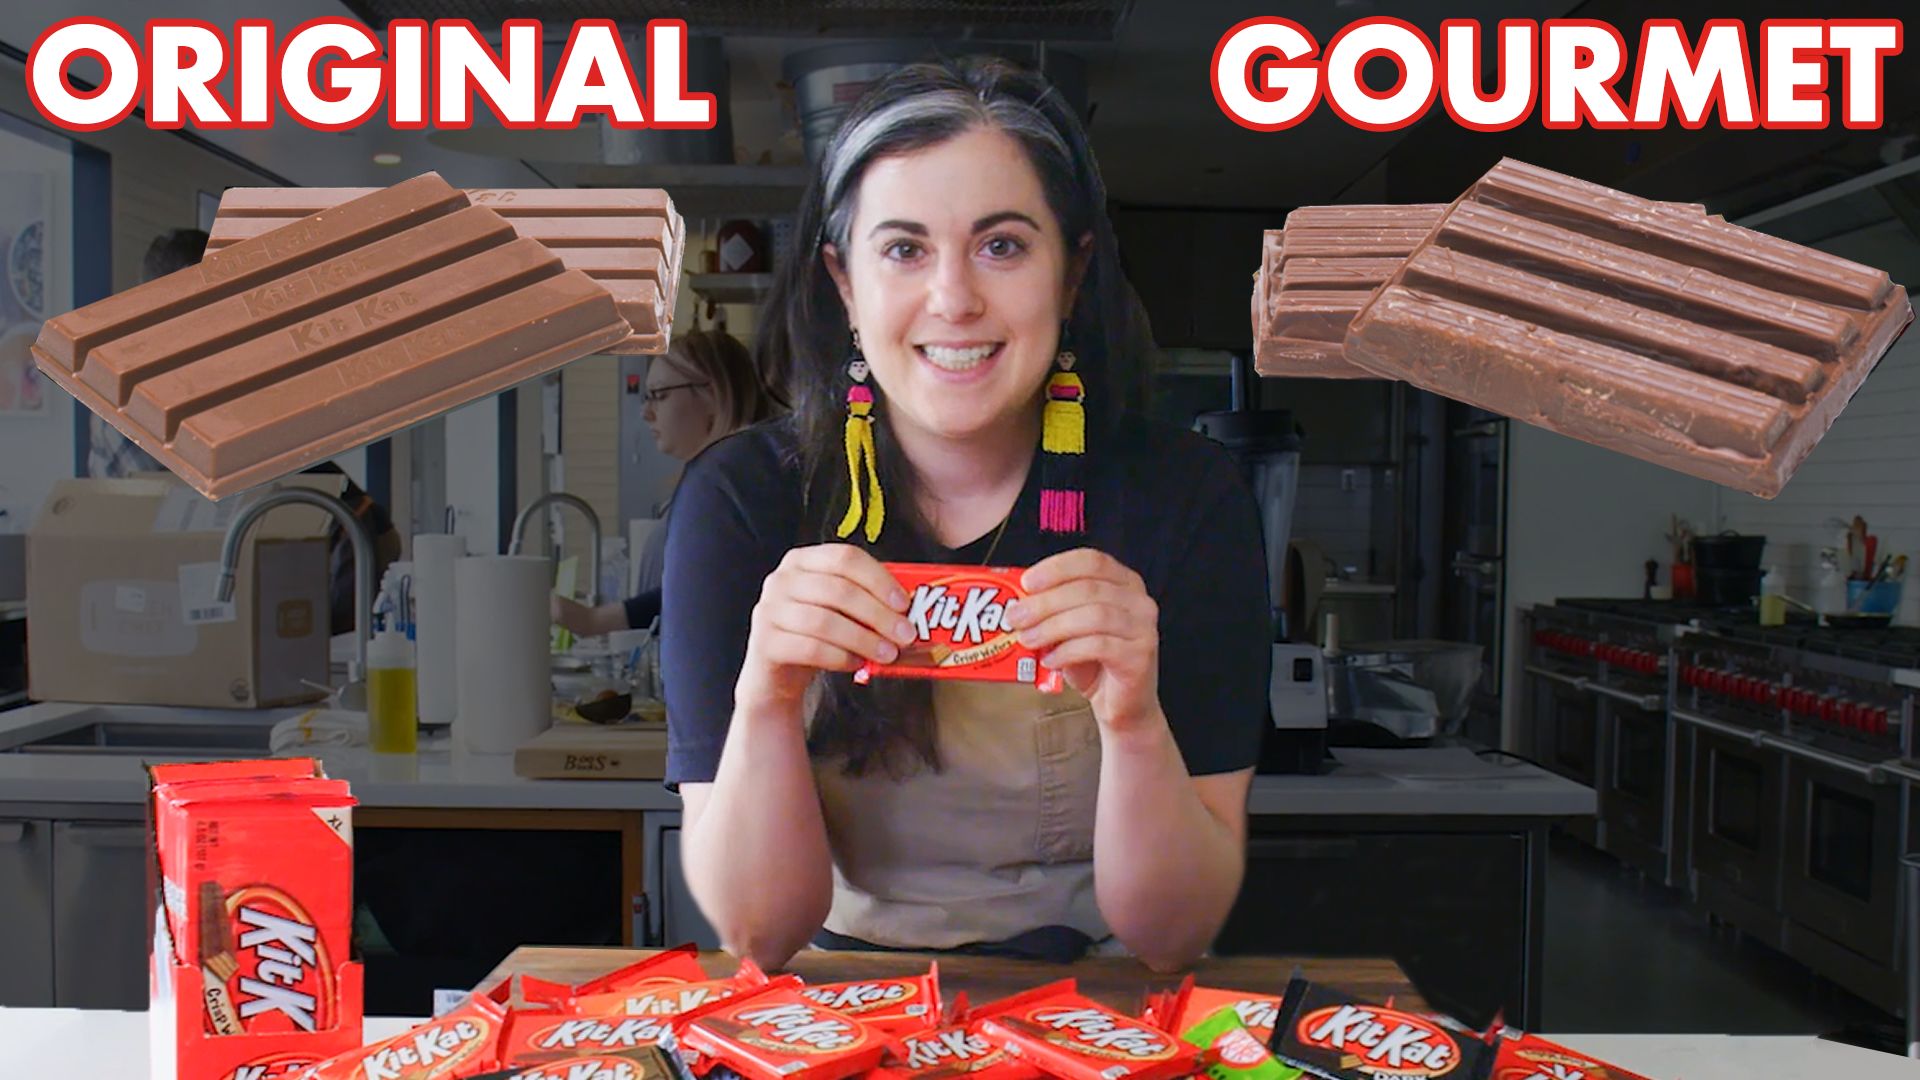 Watch Pastry Chef Attempts To Make Gourmet Kit Kats Gourmet Makes